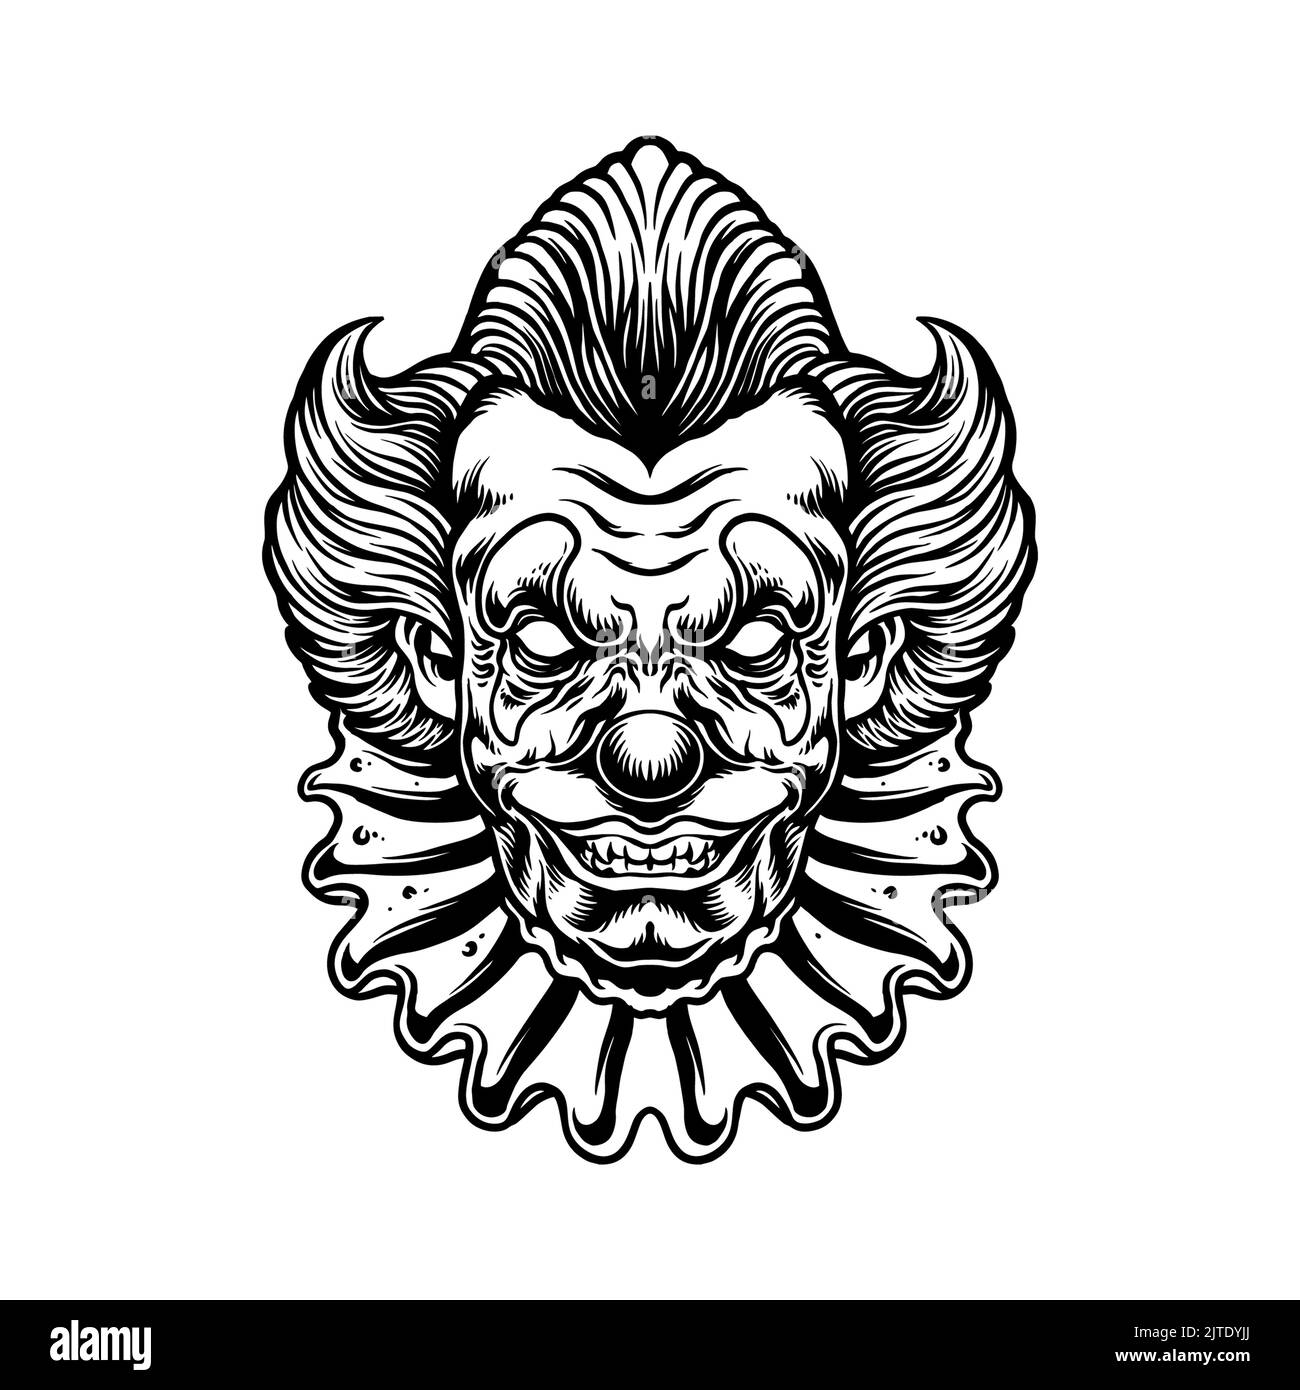 Clown Scream Logo Silhouette Vector illustrations for your work Logo, mascot merchandise t-shirt, stickers and Label designs, poster, greeting cards a Stock Photo